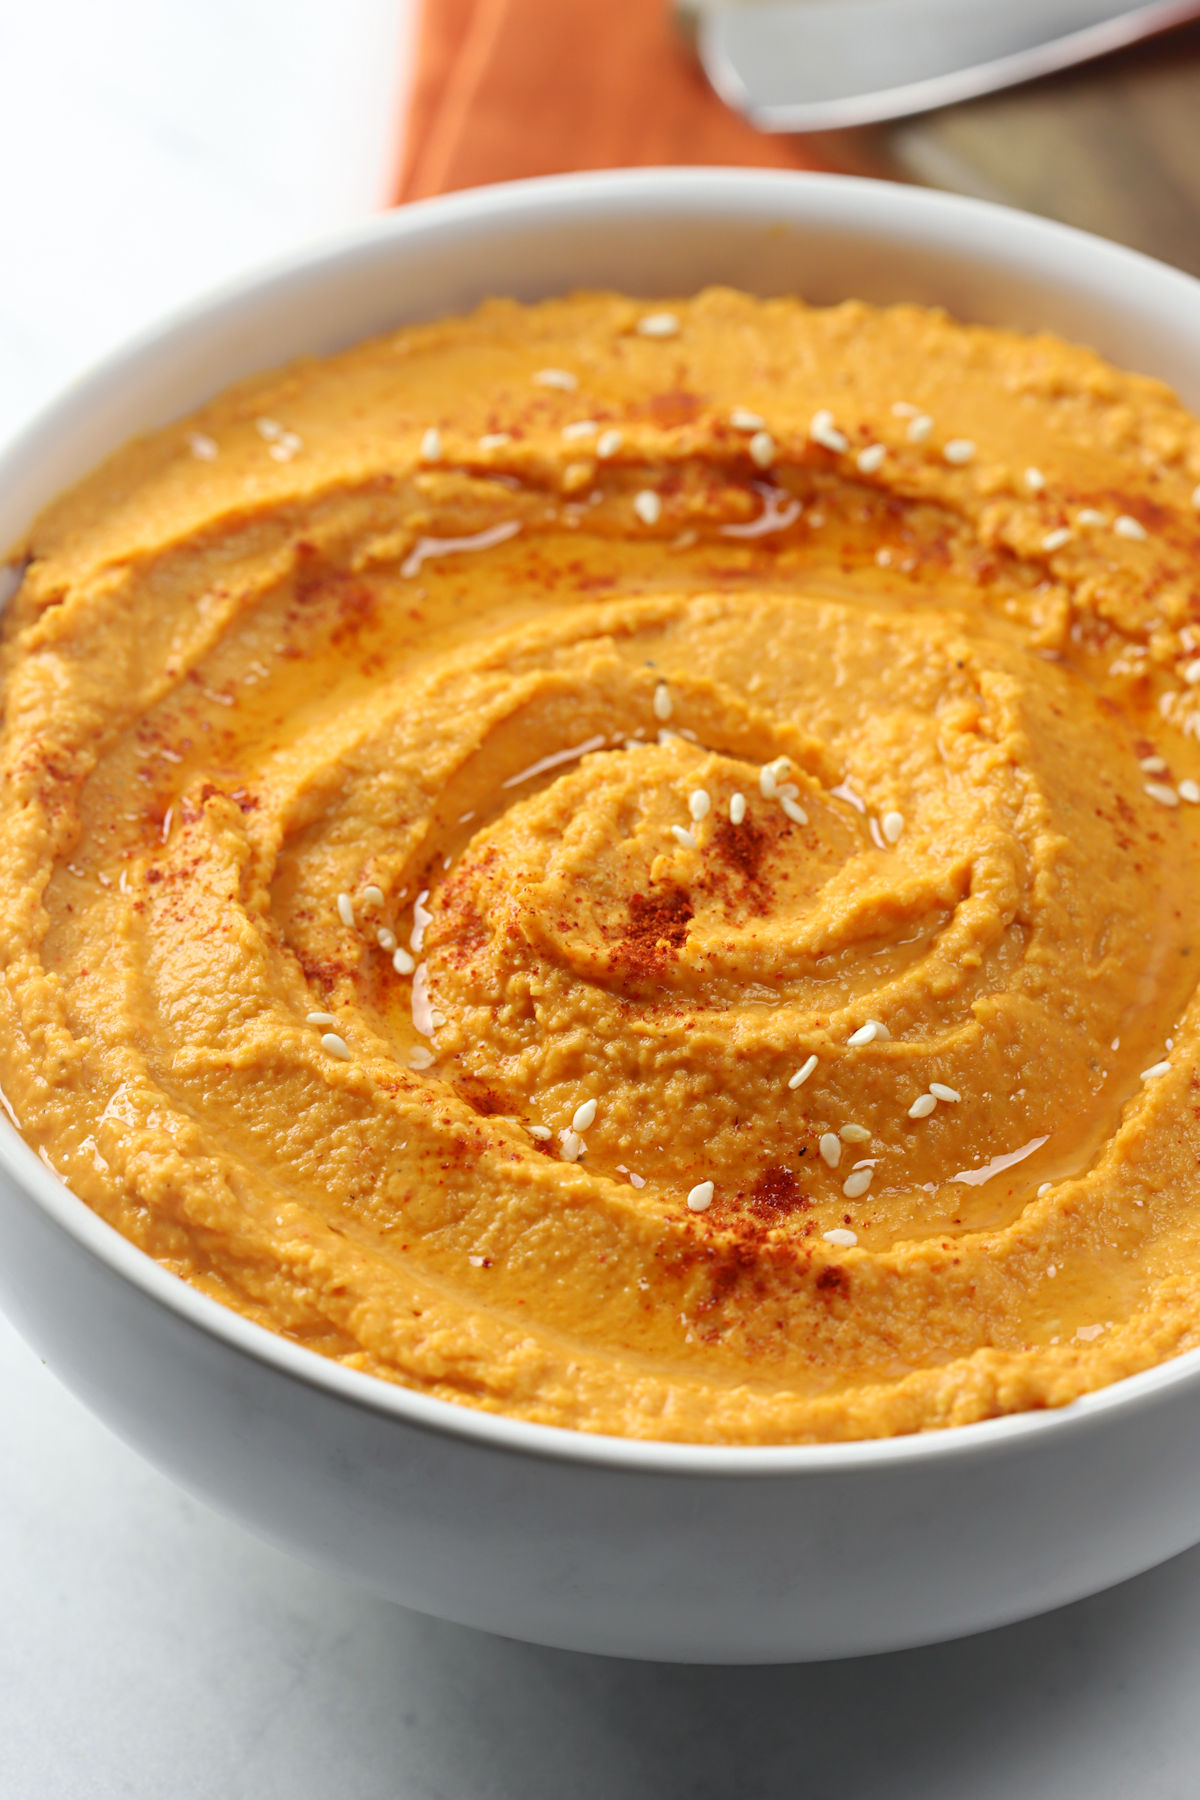 Paprika and olive oil drizzled on top of a bowl of hummus.